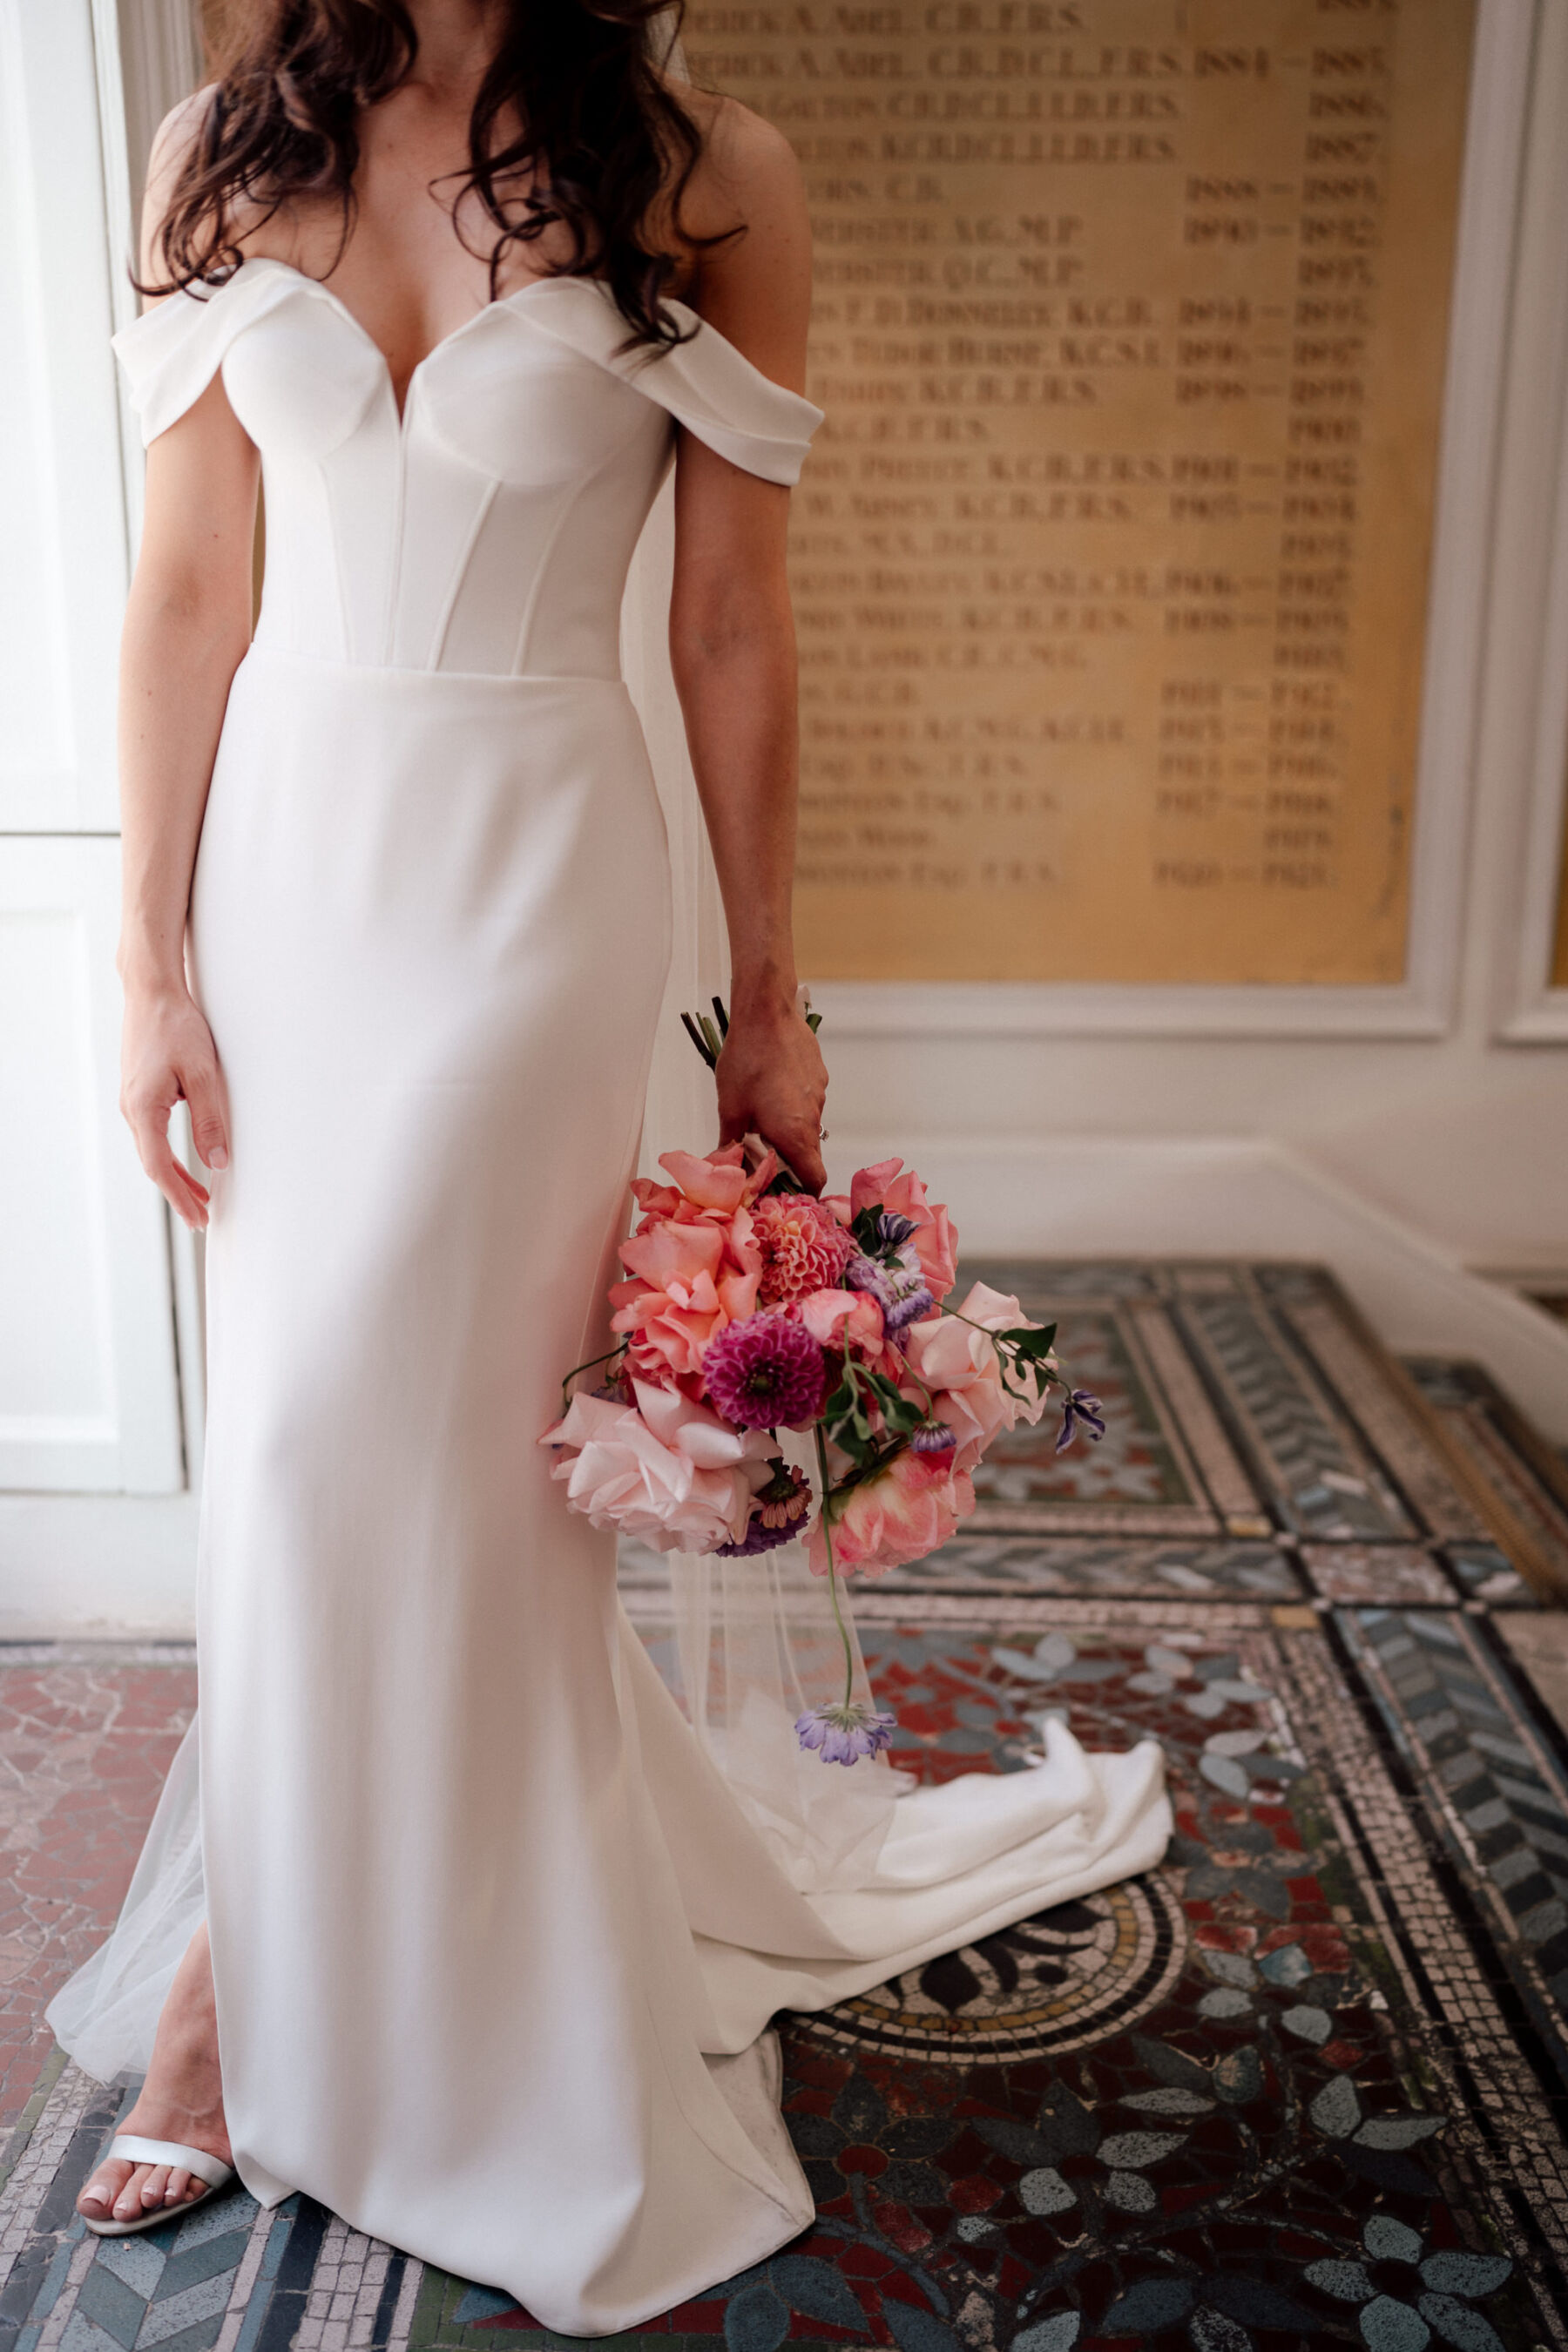 RSA House wedding, London. Bride wears Suzanne Neville.The Shannons Photography.